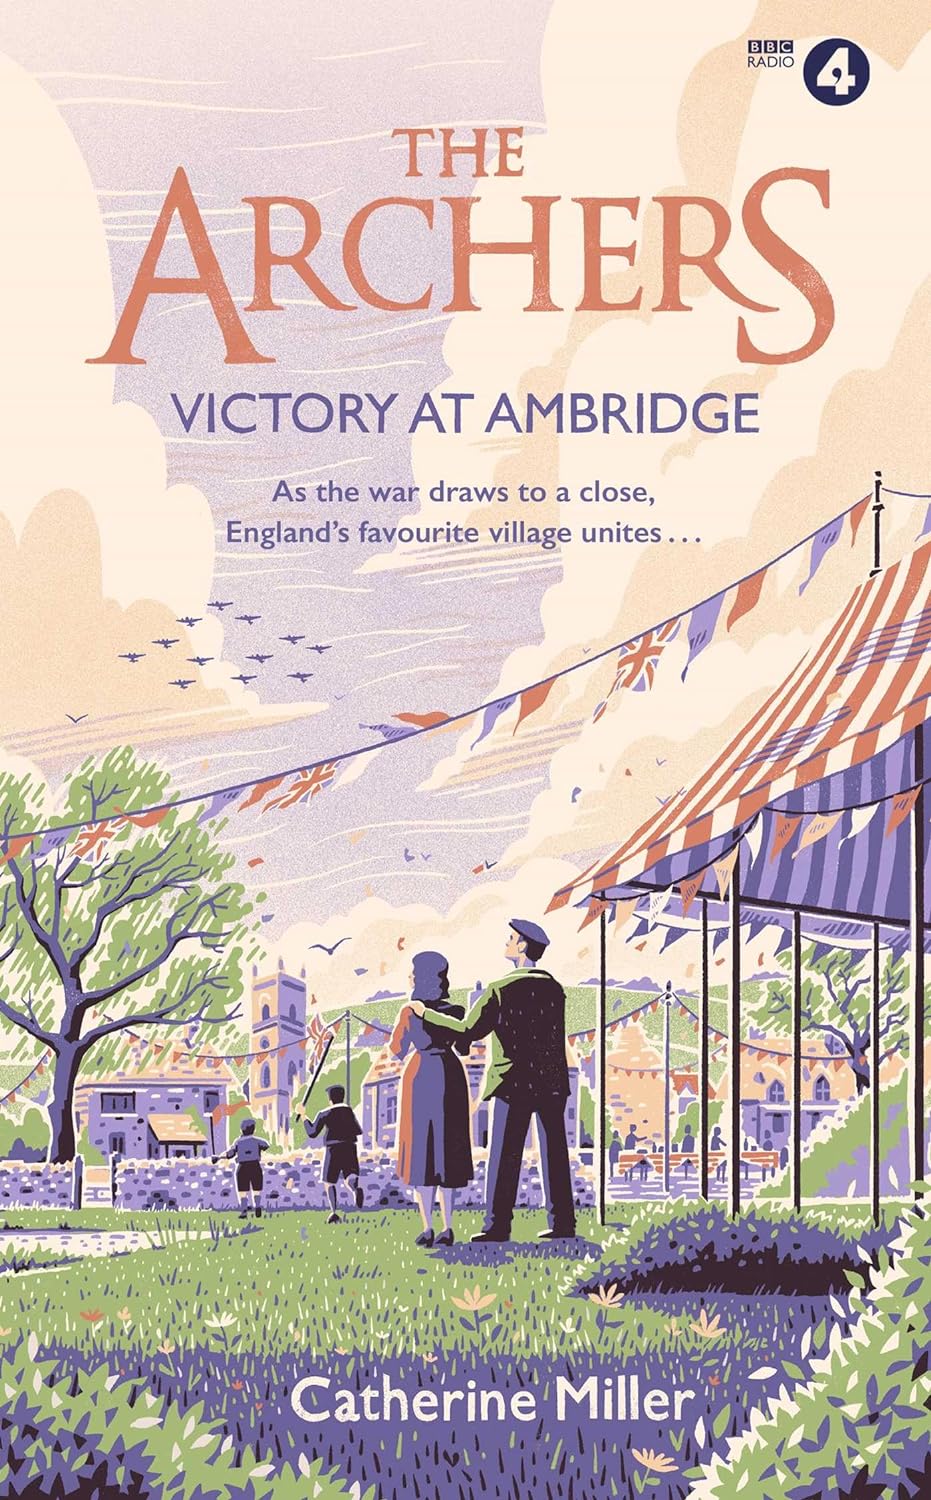 Catherine Miller - the archers victory at ambridge